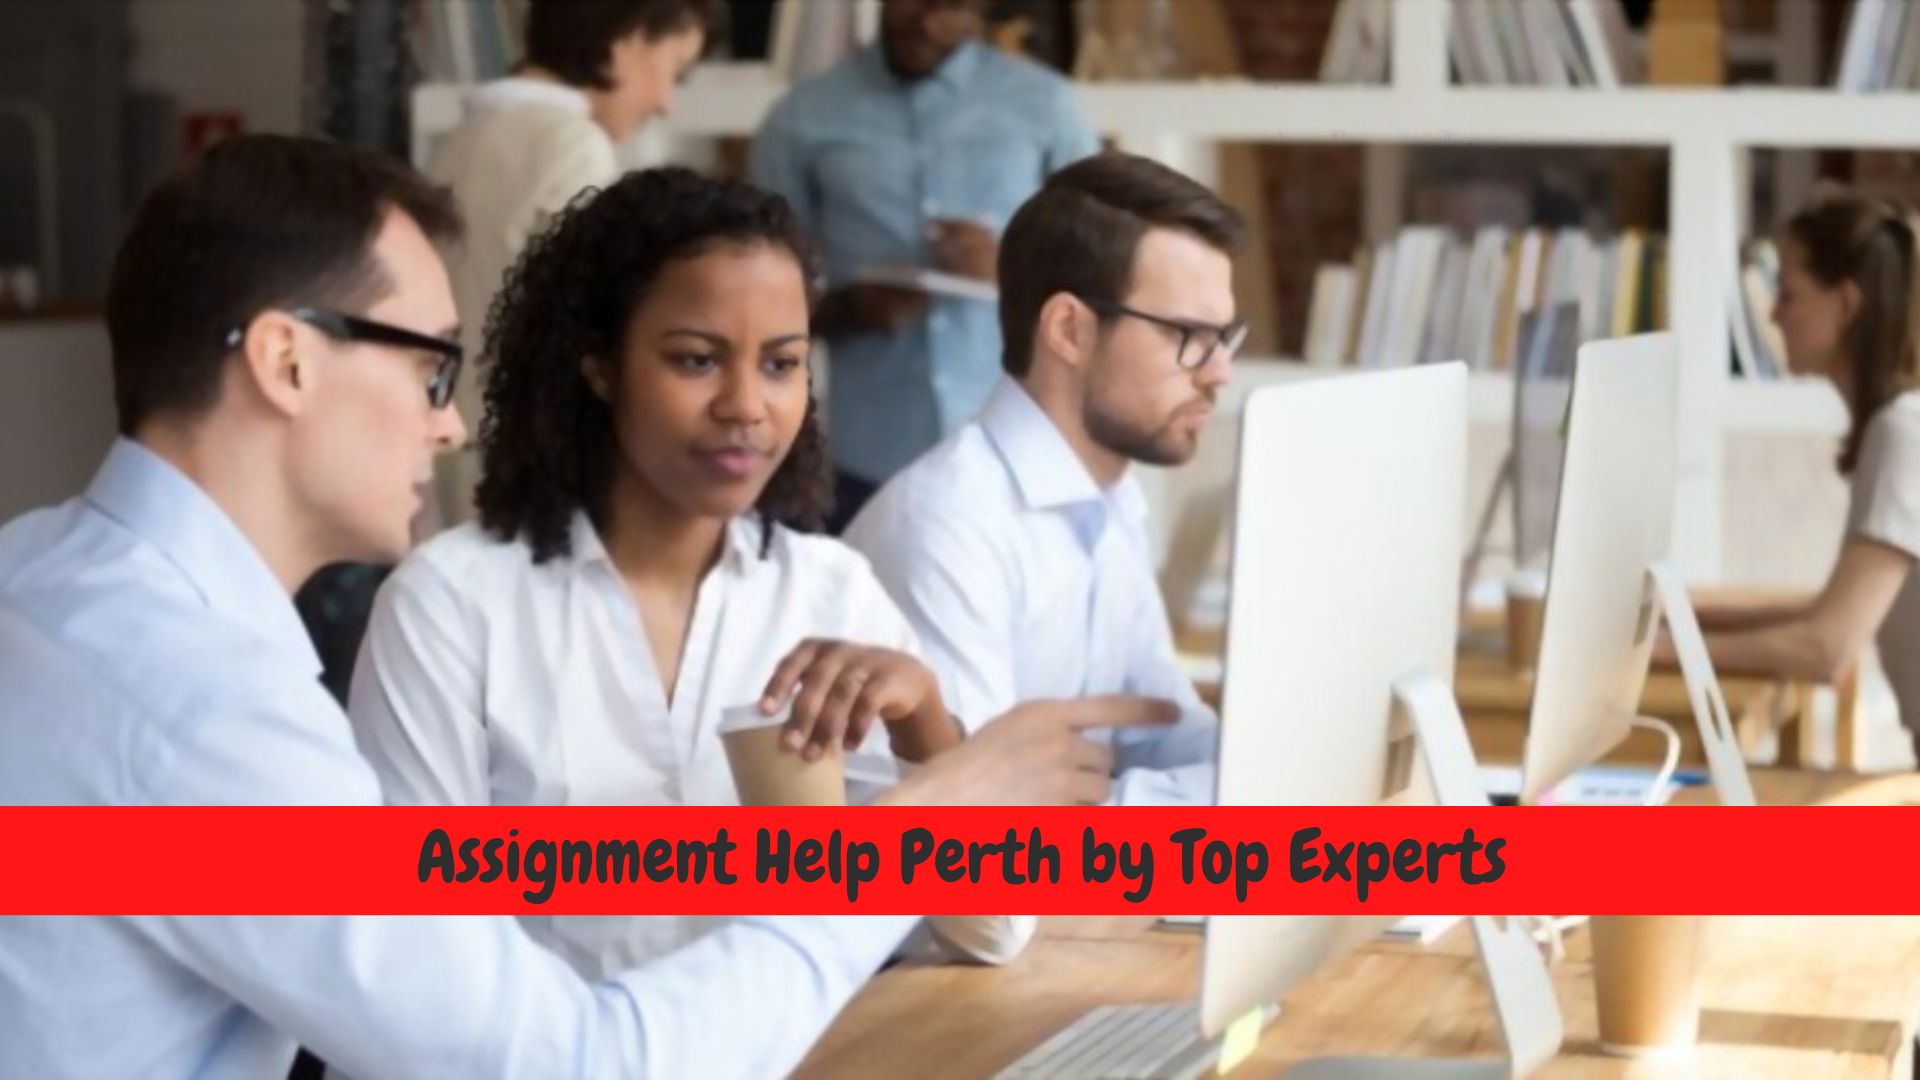 Assignment Help Perth by Top Experts